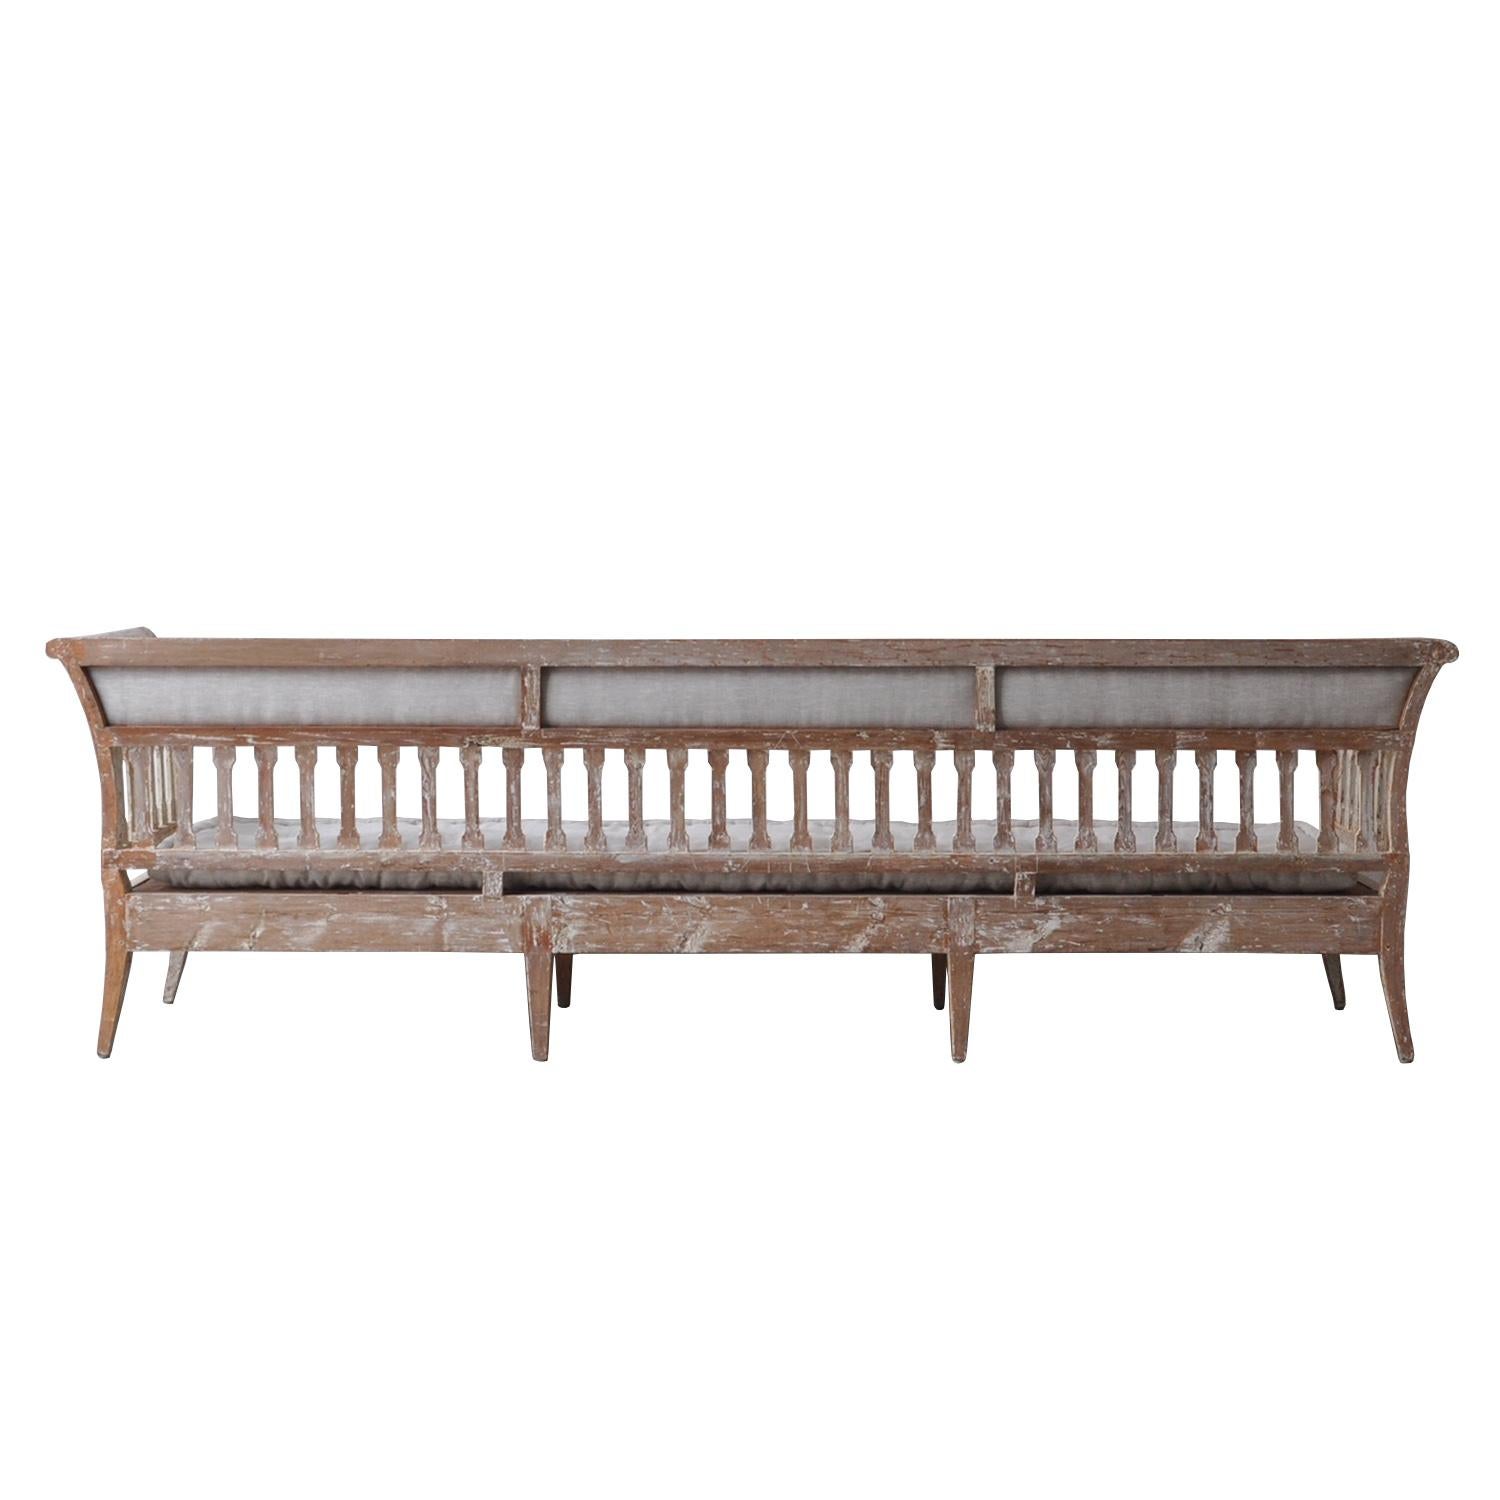 Wood Exception Period Gustavian Long Sofa in Original Paint